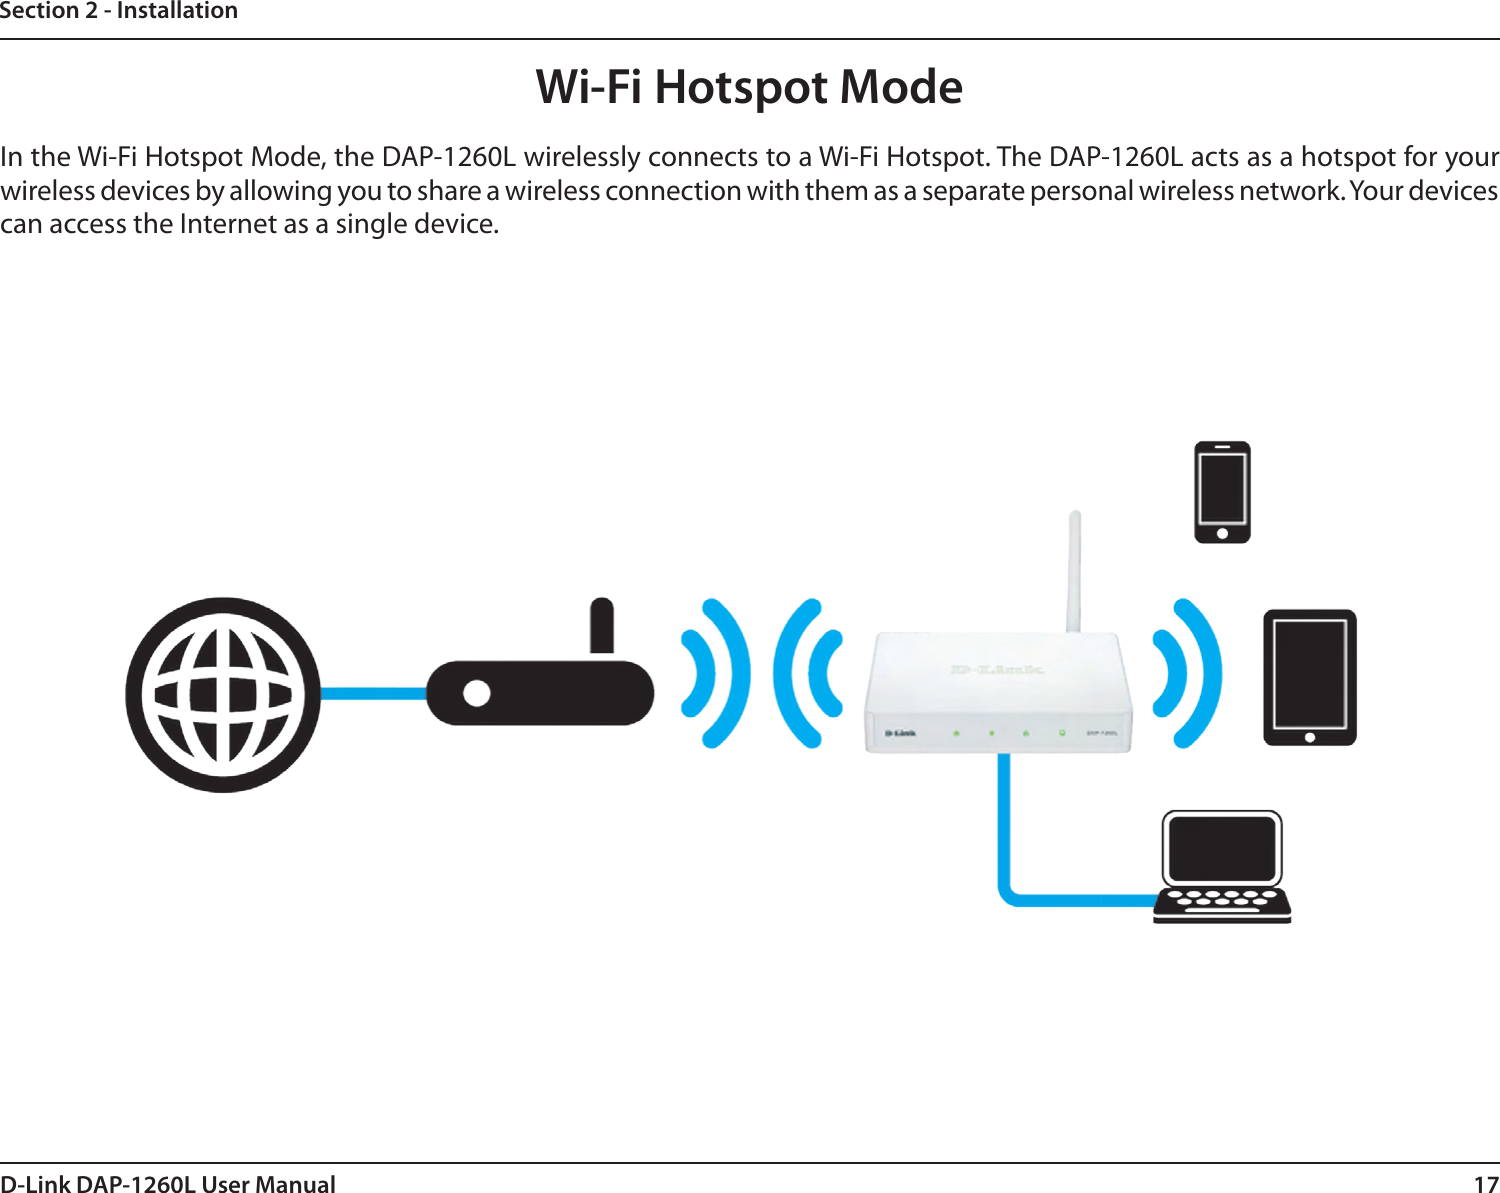 17D-Link DAP-1260L User ManualSection 2 - InstallationWi-Fi Hotspot ModeIn the Wi-Fi Hotspot Mode, the DAP-1260L wirelessly connects to a Wi-Fi Hotspot. The DAP-1260L acts as a hotspot for your wireless devices by allowing you to share a wireless connection with them as a separate personal wireless network. Your devices can access the Internet as a single device. 